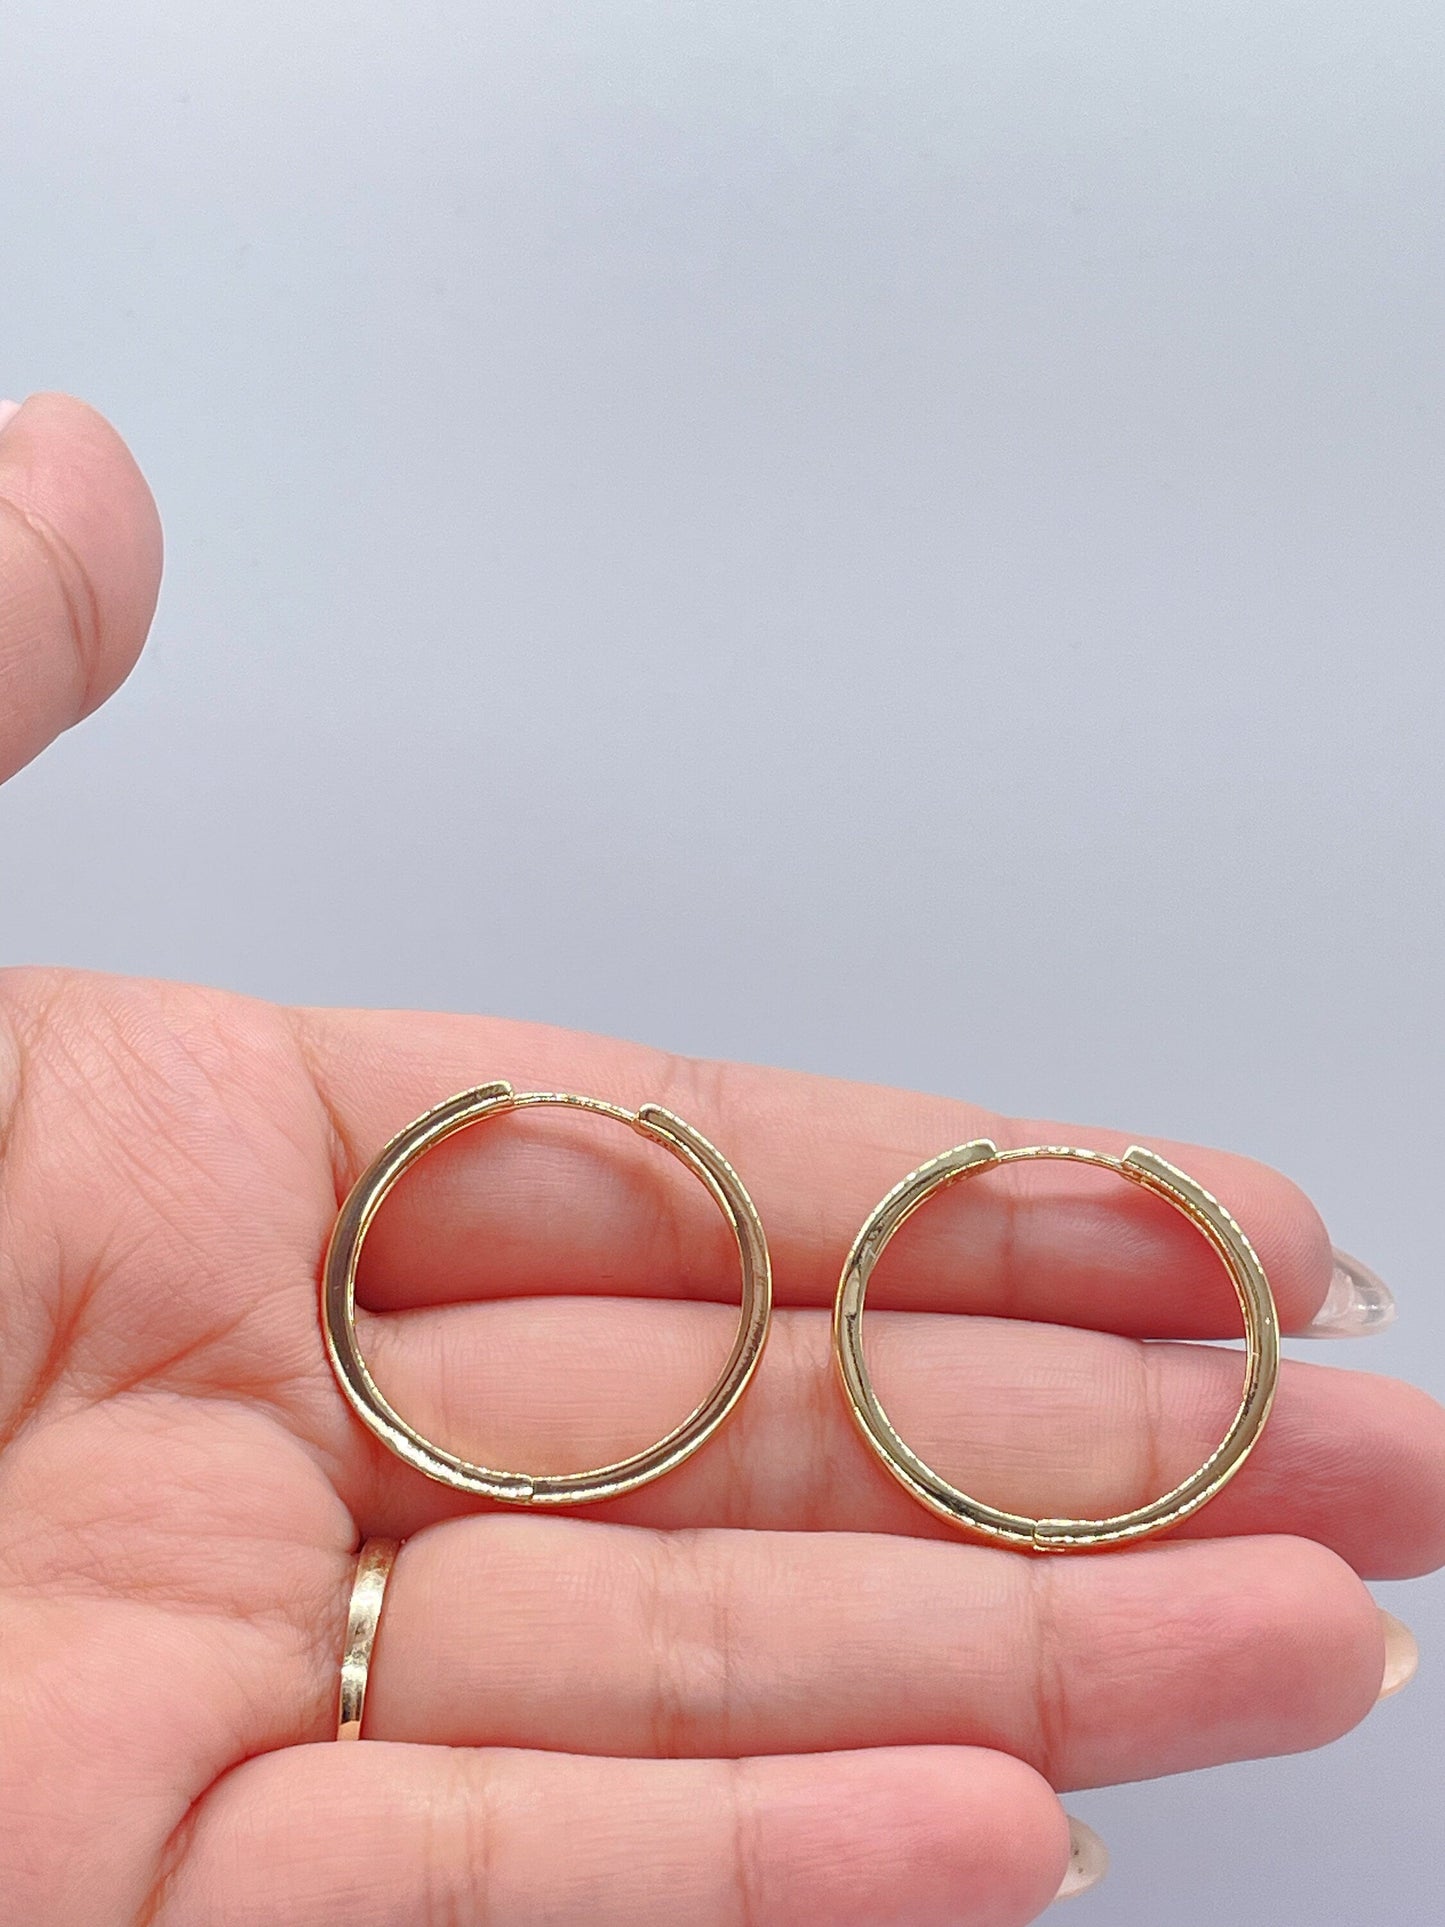 18k Gold Filled Ultra Thin Small Plain Sharp Edged Huggie-Hoop Earrings, Daily Jewlery, Gifts for her, Birthday Gift, Dainty Hoops